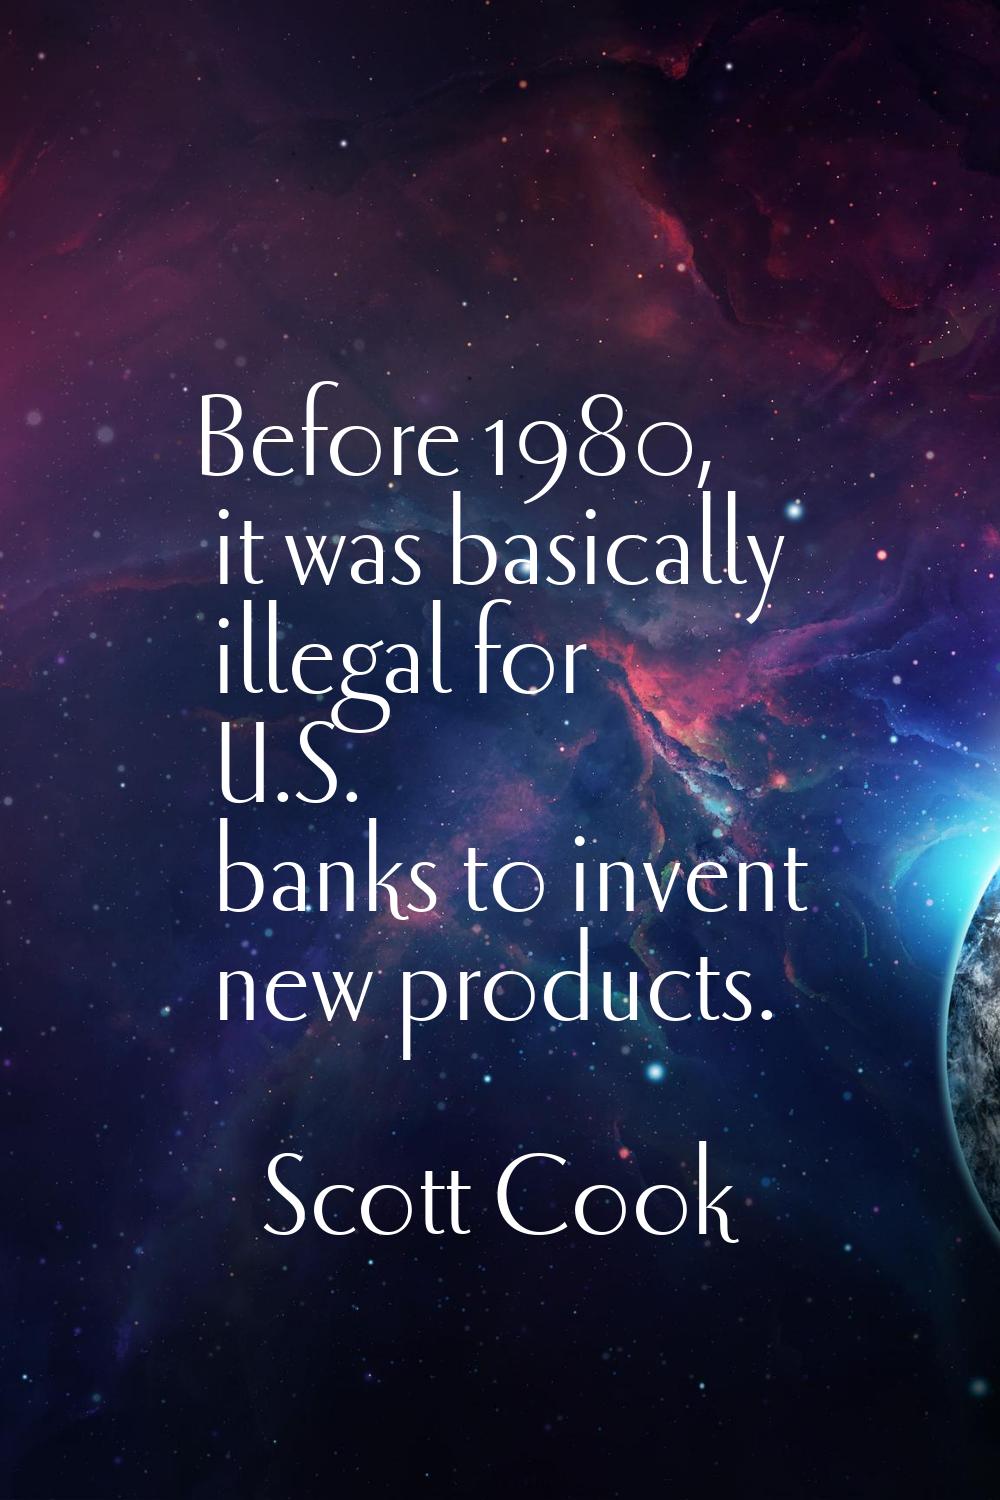 Before 1980, it was basically illegal for U.S. banks to invent new products.